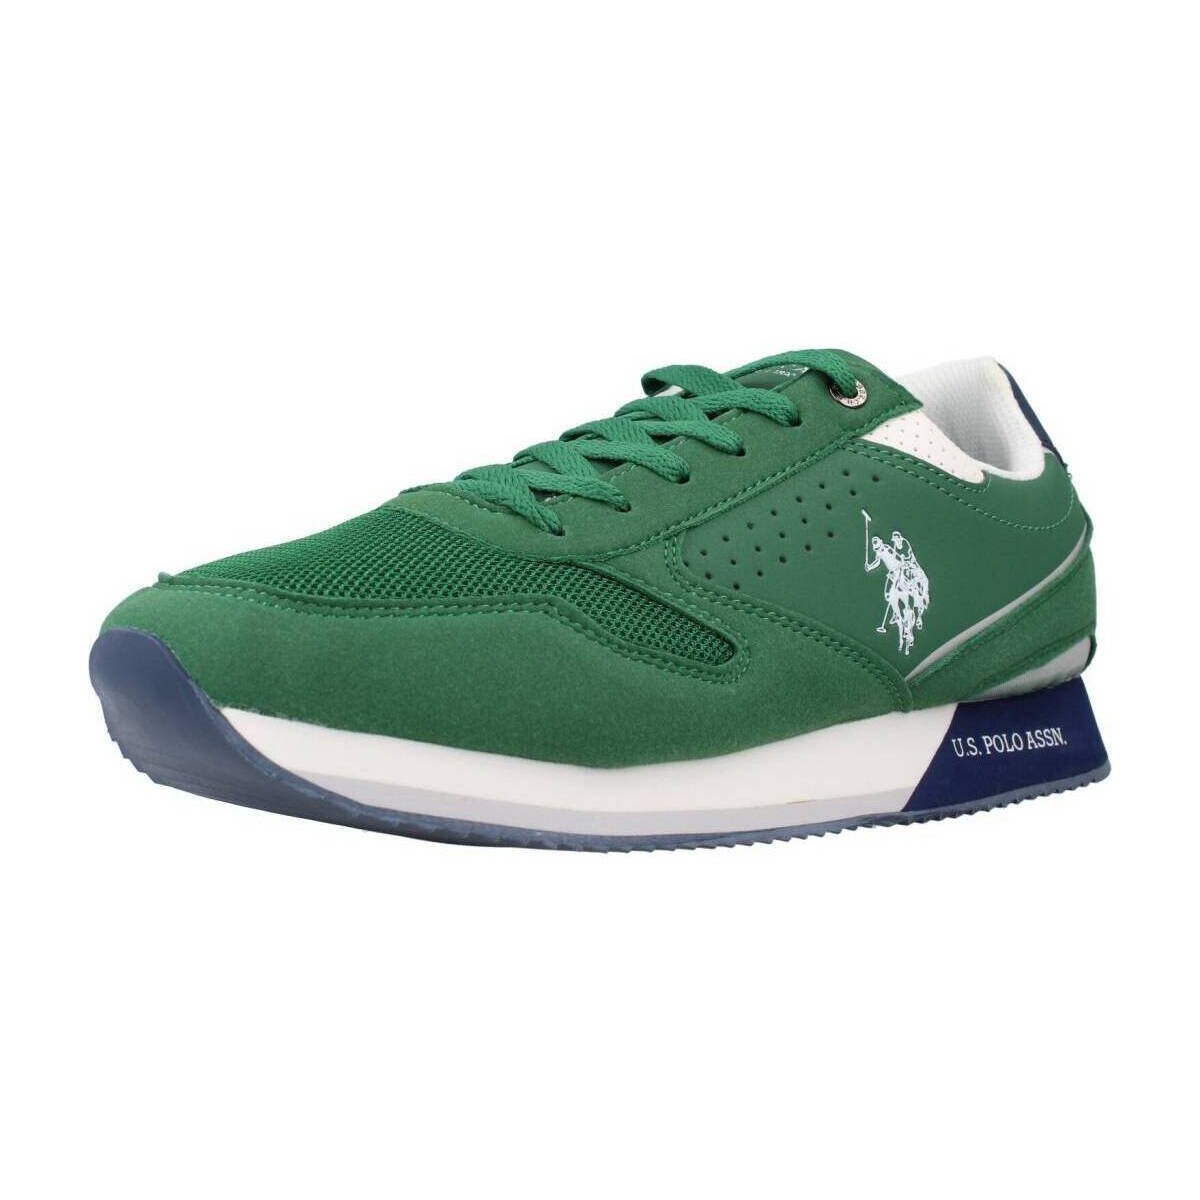 Xαμηλά Sneakers U.S Polo Assn. NOBIL003M